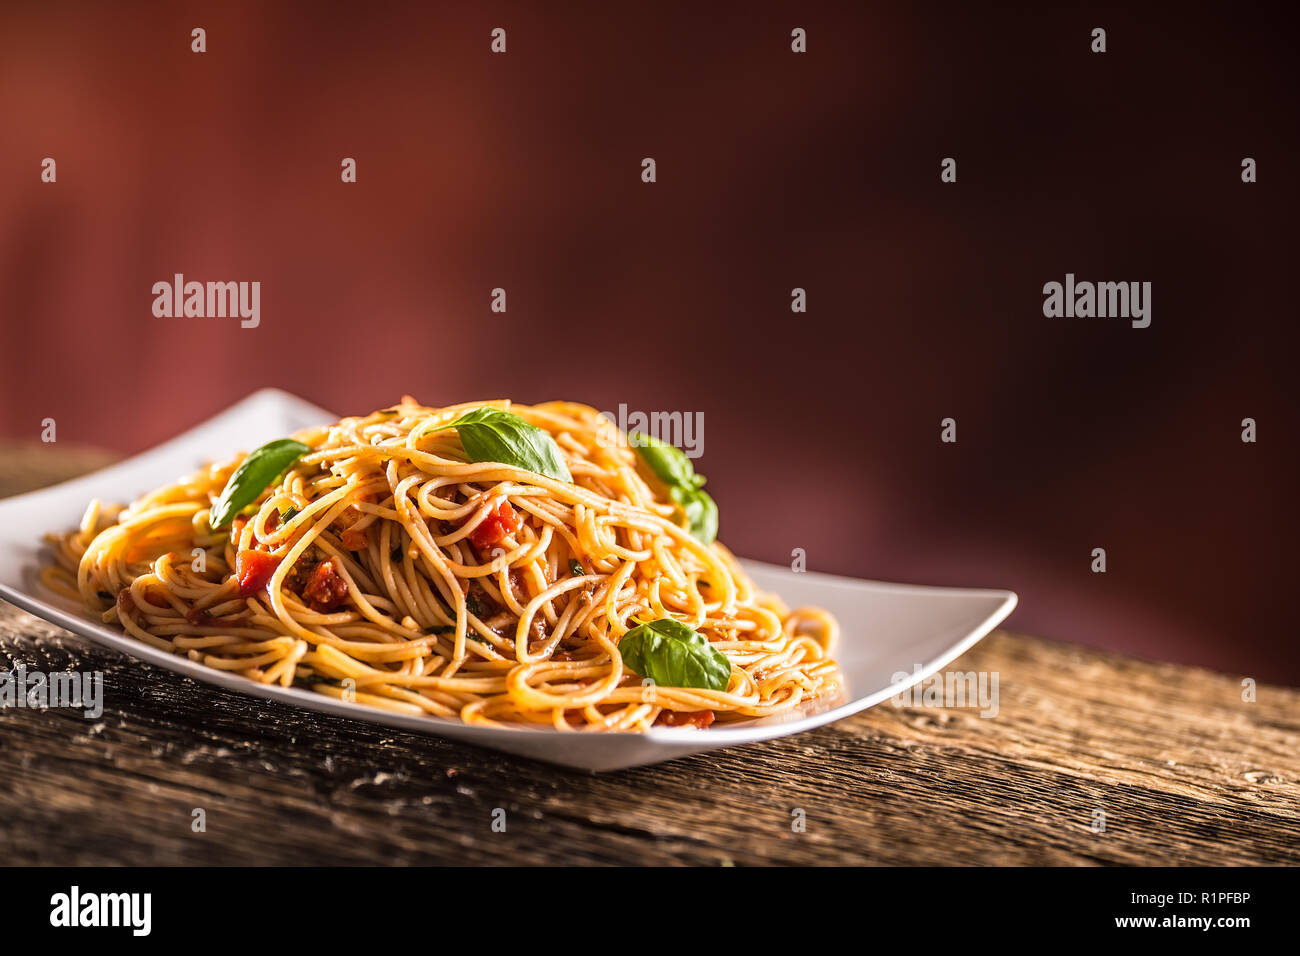 Italian pasta spaghetti with tomato sauce basil and parmesan cheese in white plate. Stock Photo